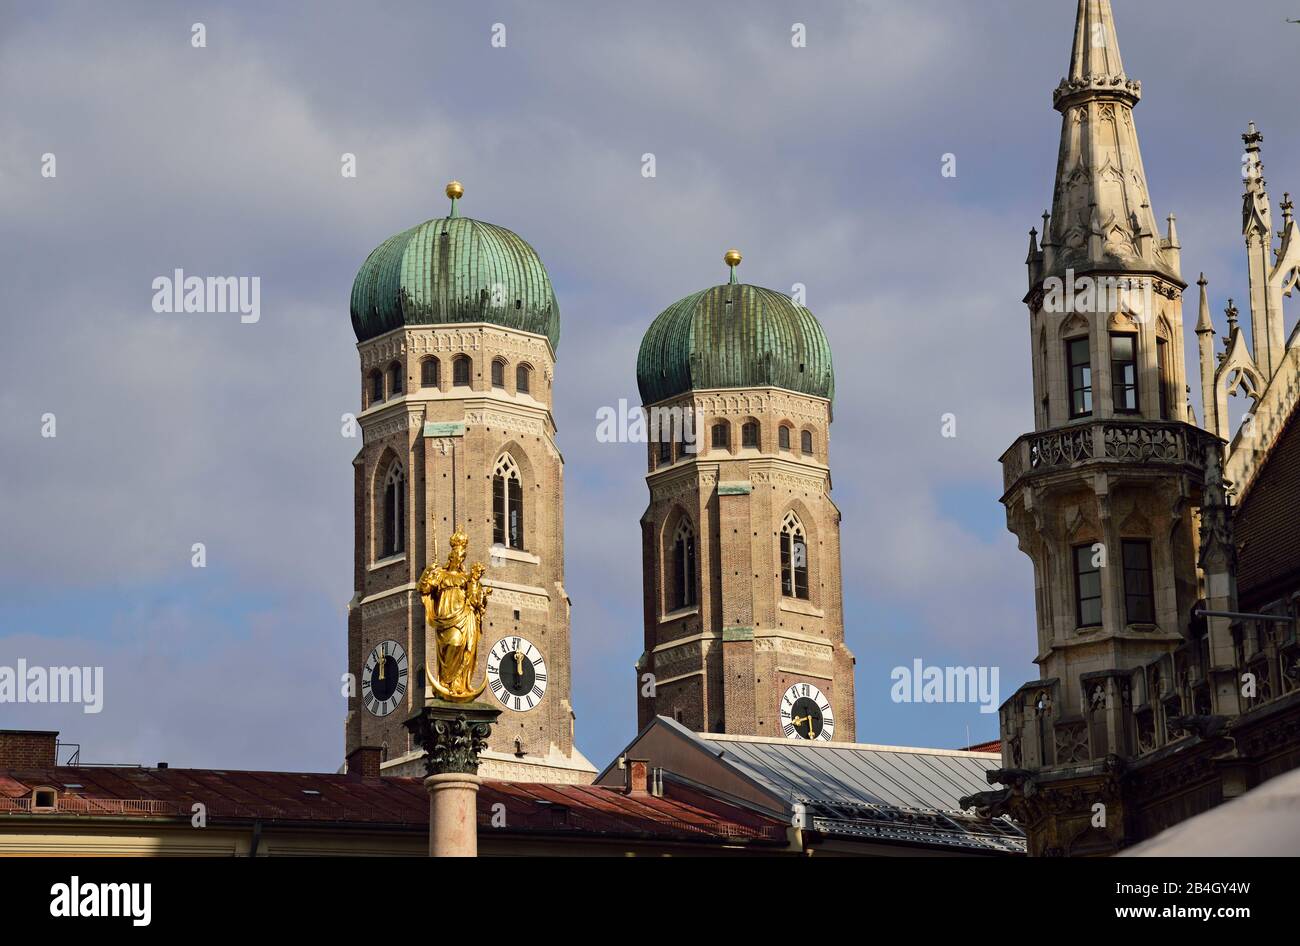 Europe, Germany, Bavaria, City of Munich, Marienplatz, New Town Hall in the Neo-Gothic style, built 1867 to 1908, bell and figure play in the town hall tower, towers of the Frauenkirche Stock Photo